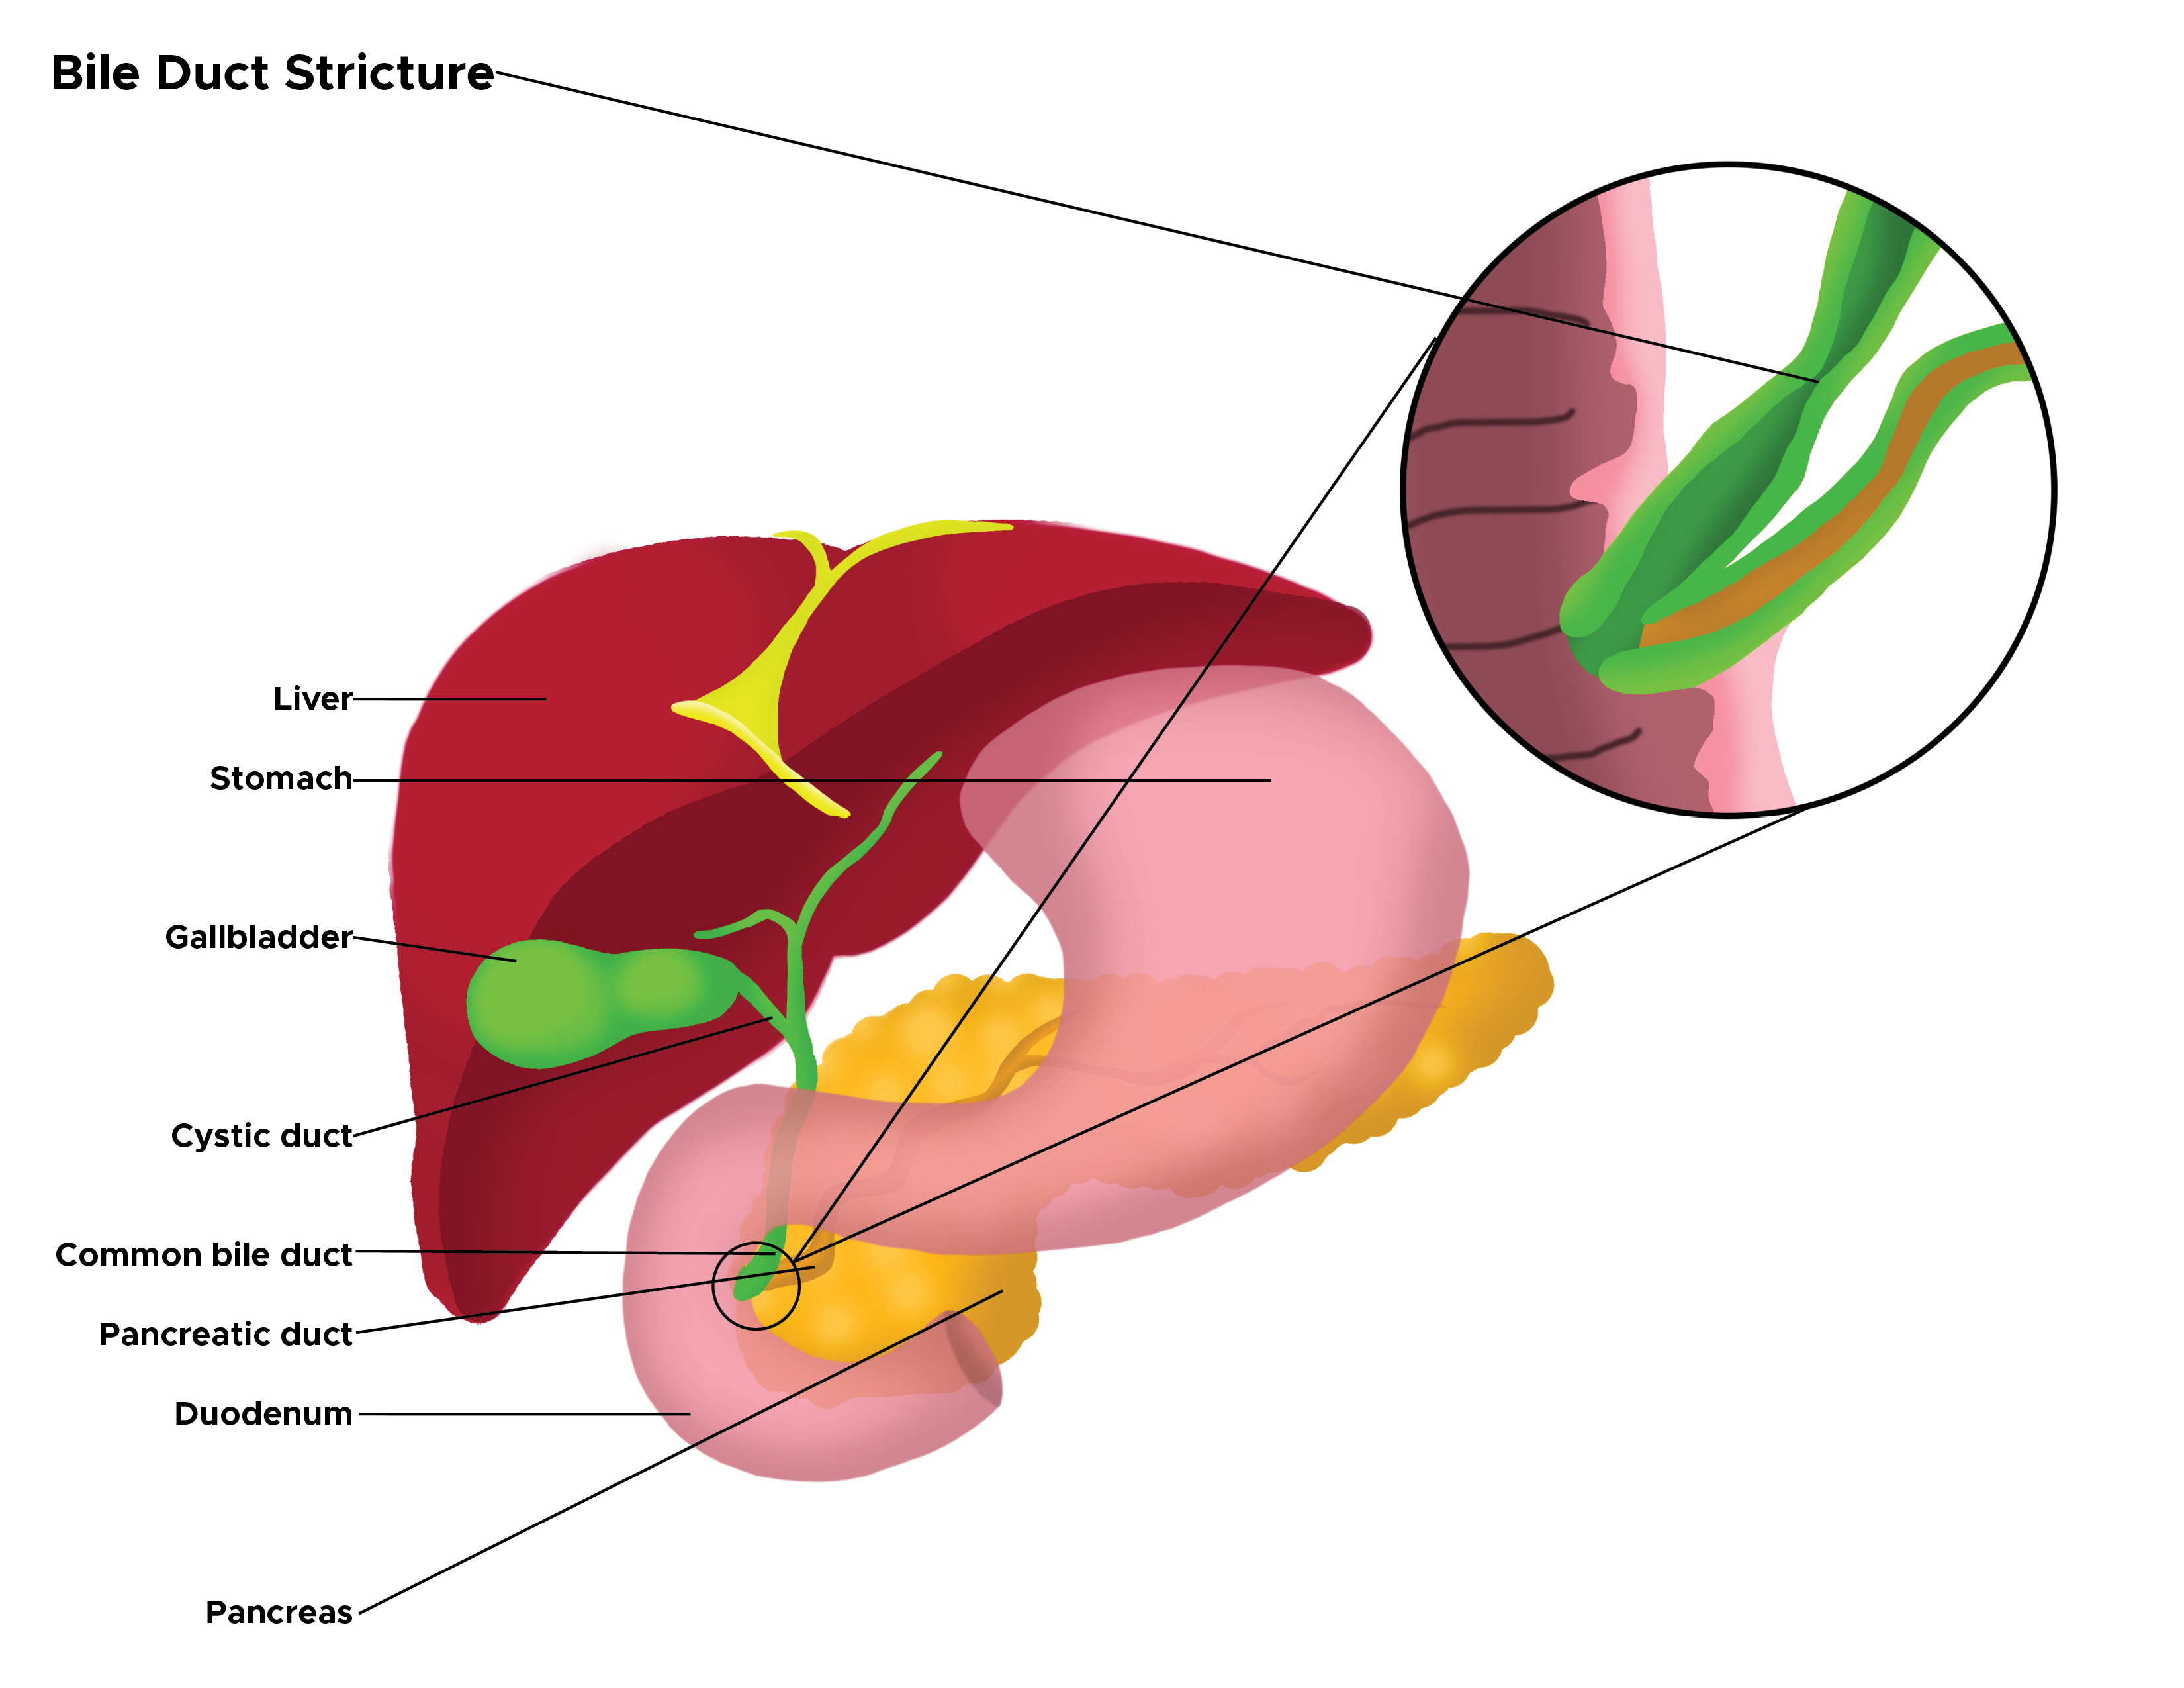 Illustration of bile duct stricture. Liver, stomach, gallbladder, cystic duct, common bile duct, pancreatic duct, duodenum, pancreas.